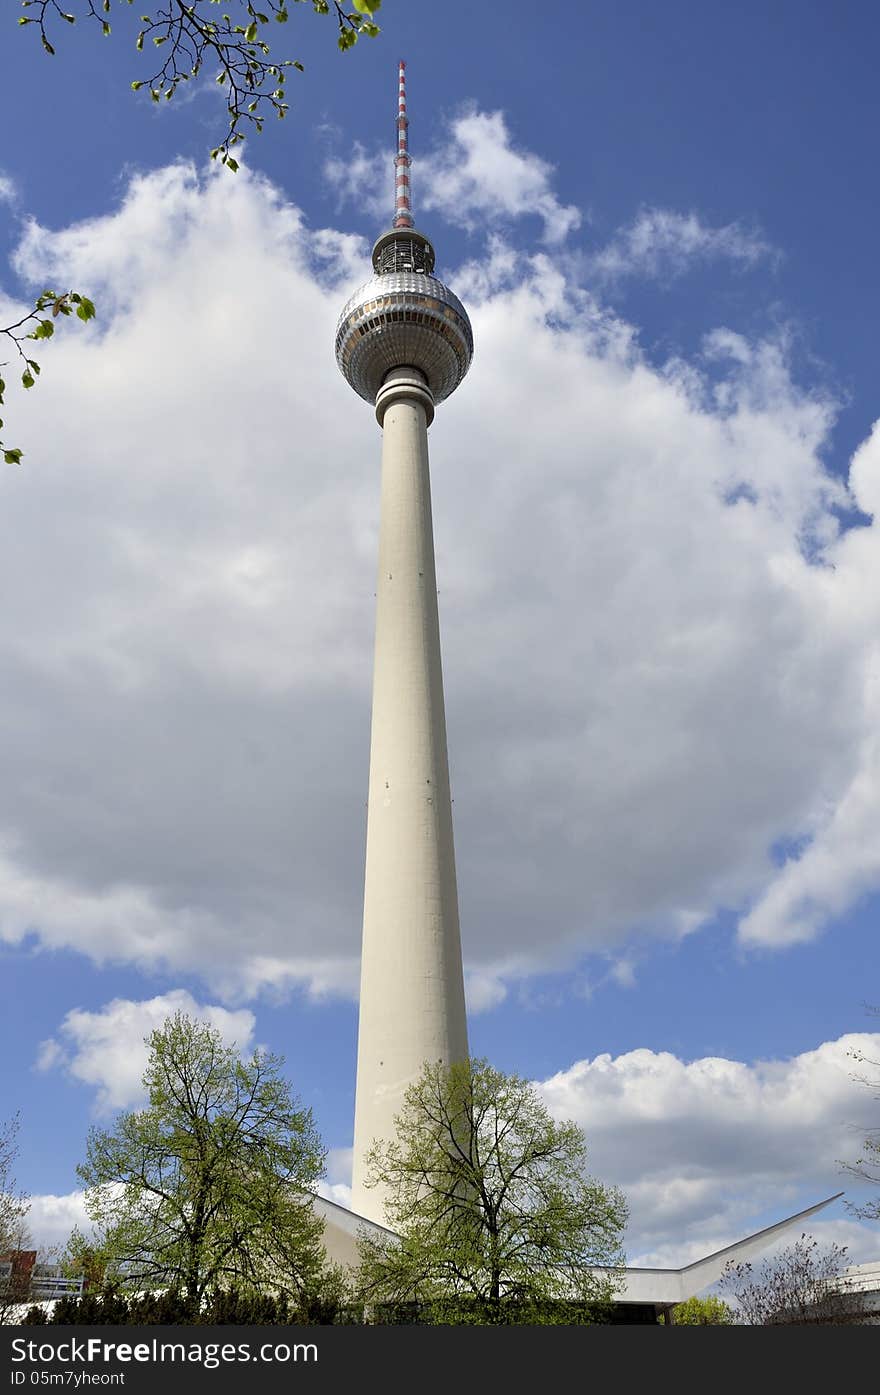 The television tower in Berlin, Alexander Platz; famous and reputed sightseeing site for tourists. The television tower in Berlin, Alexander Platz; famous and reputed sightseeing site for tourists.